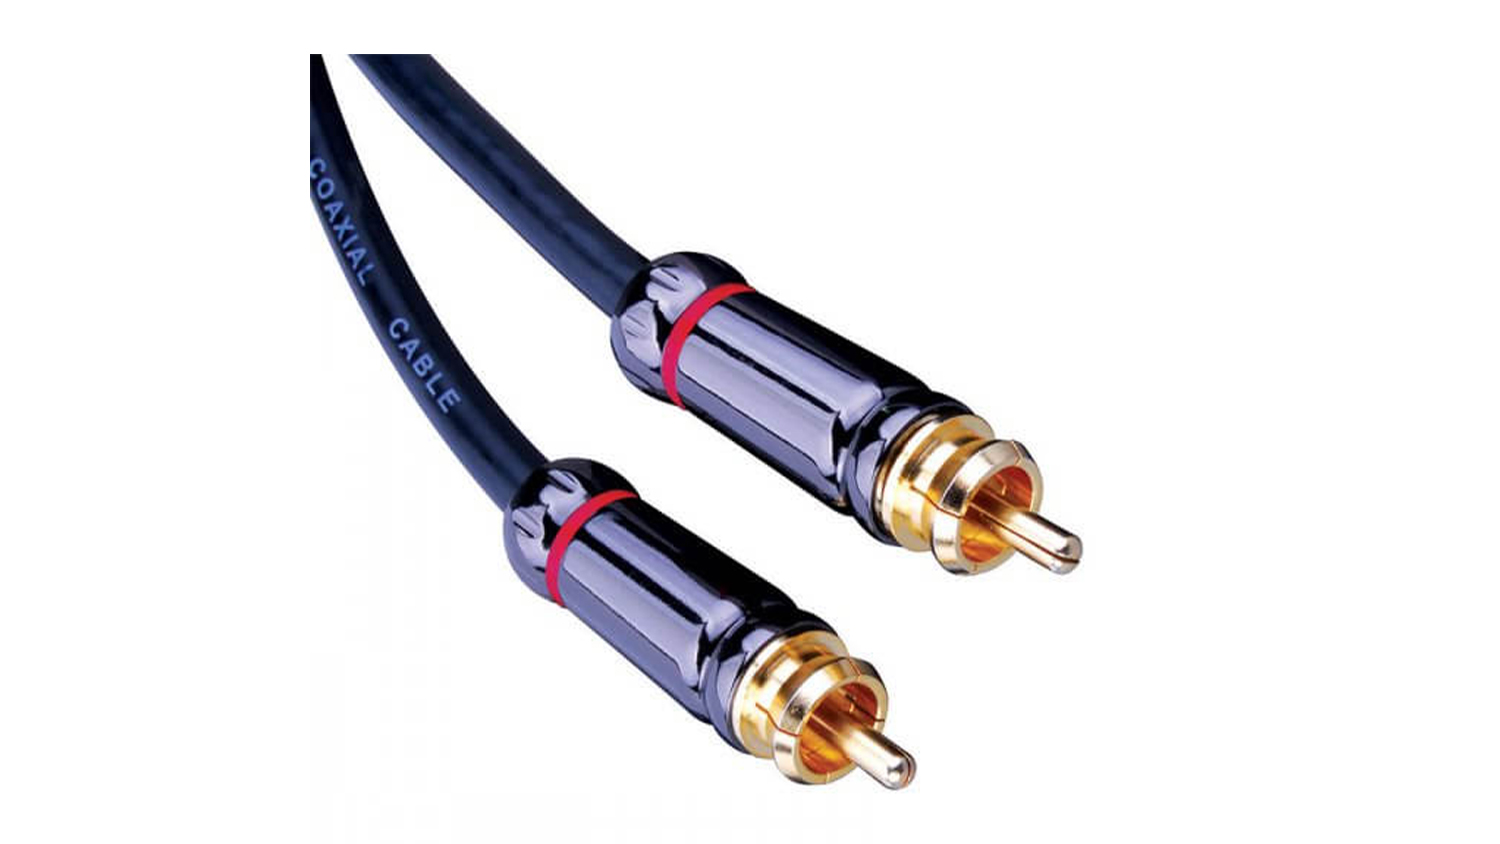 monster rca connector